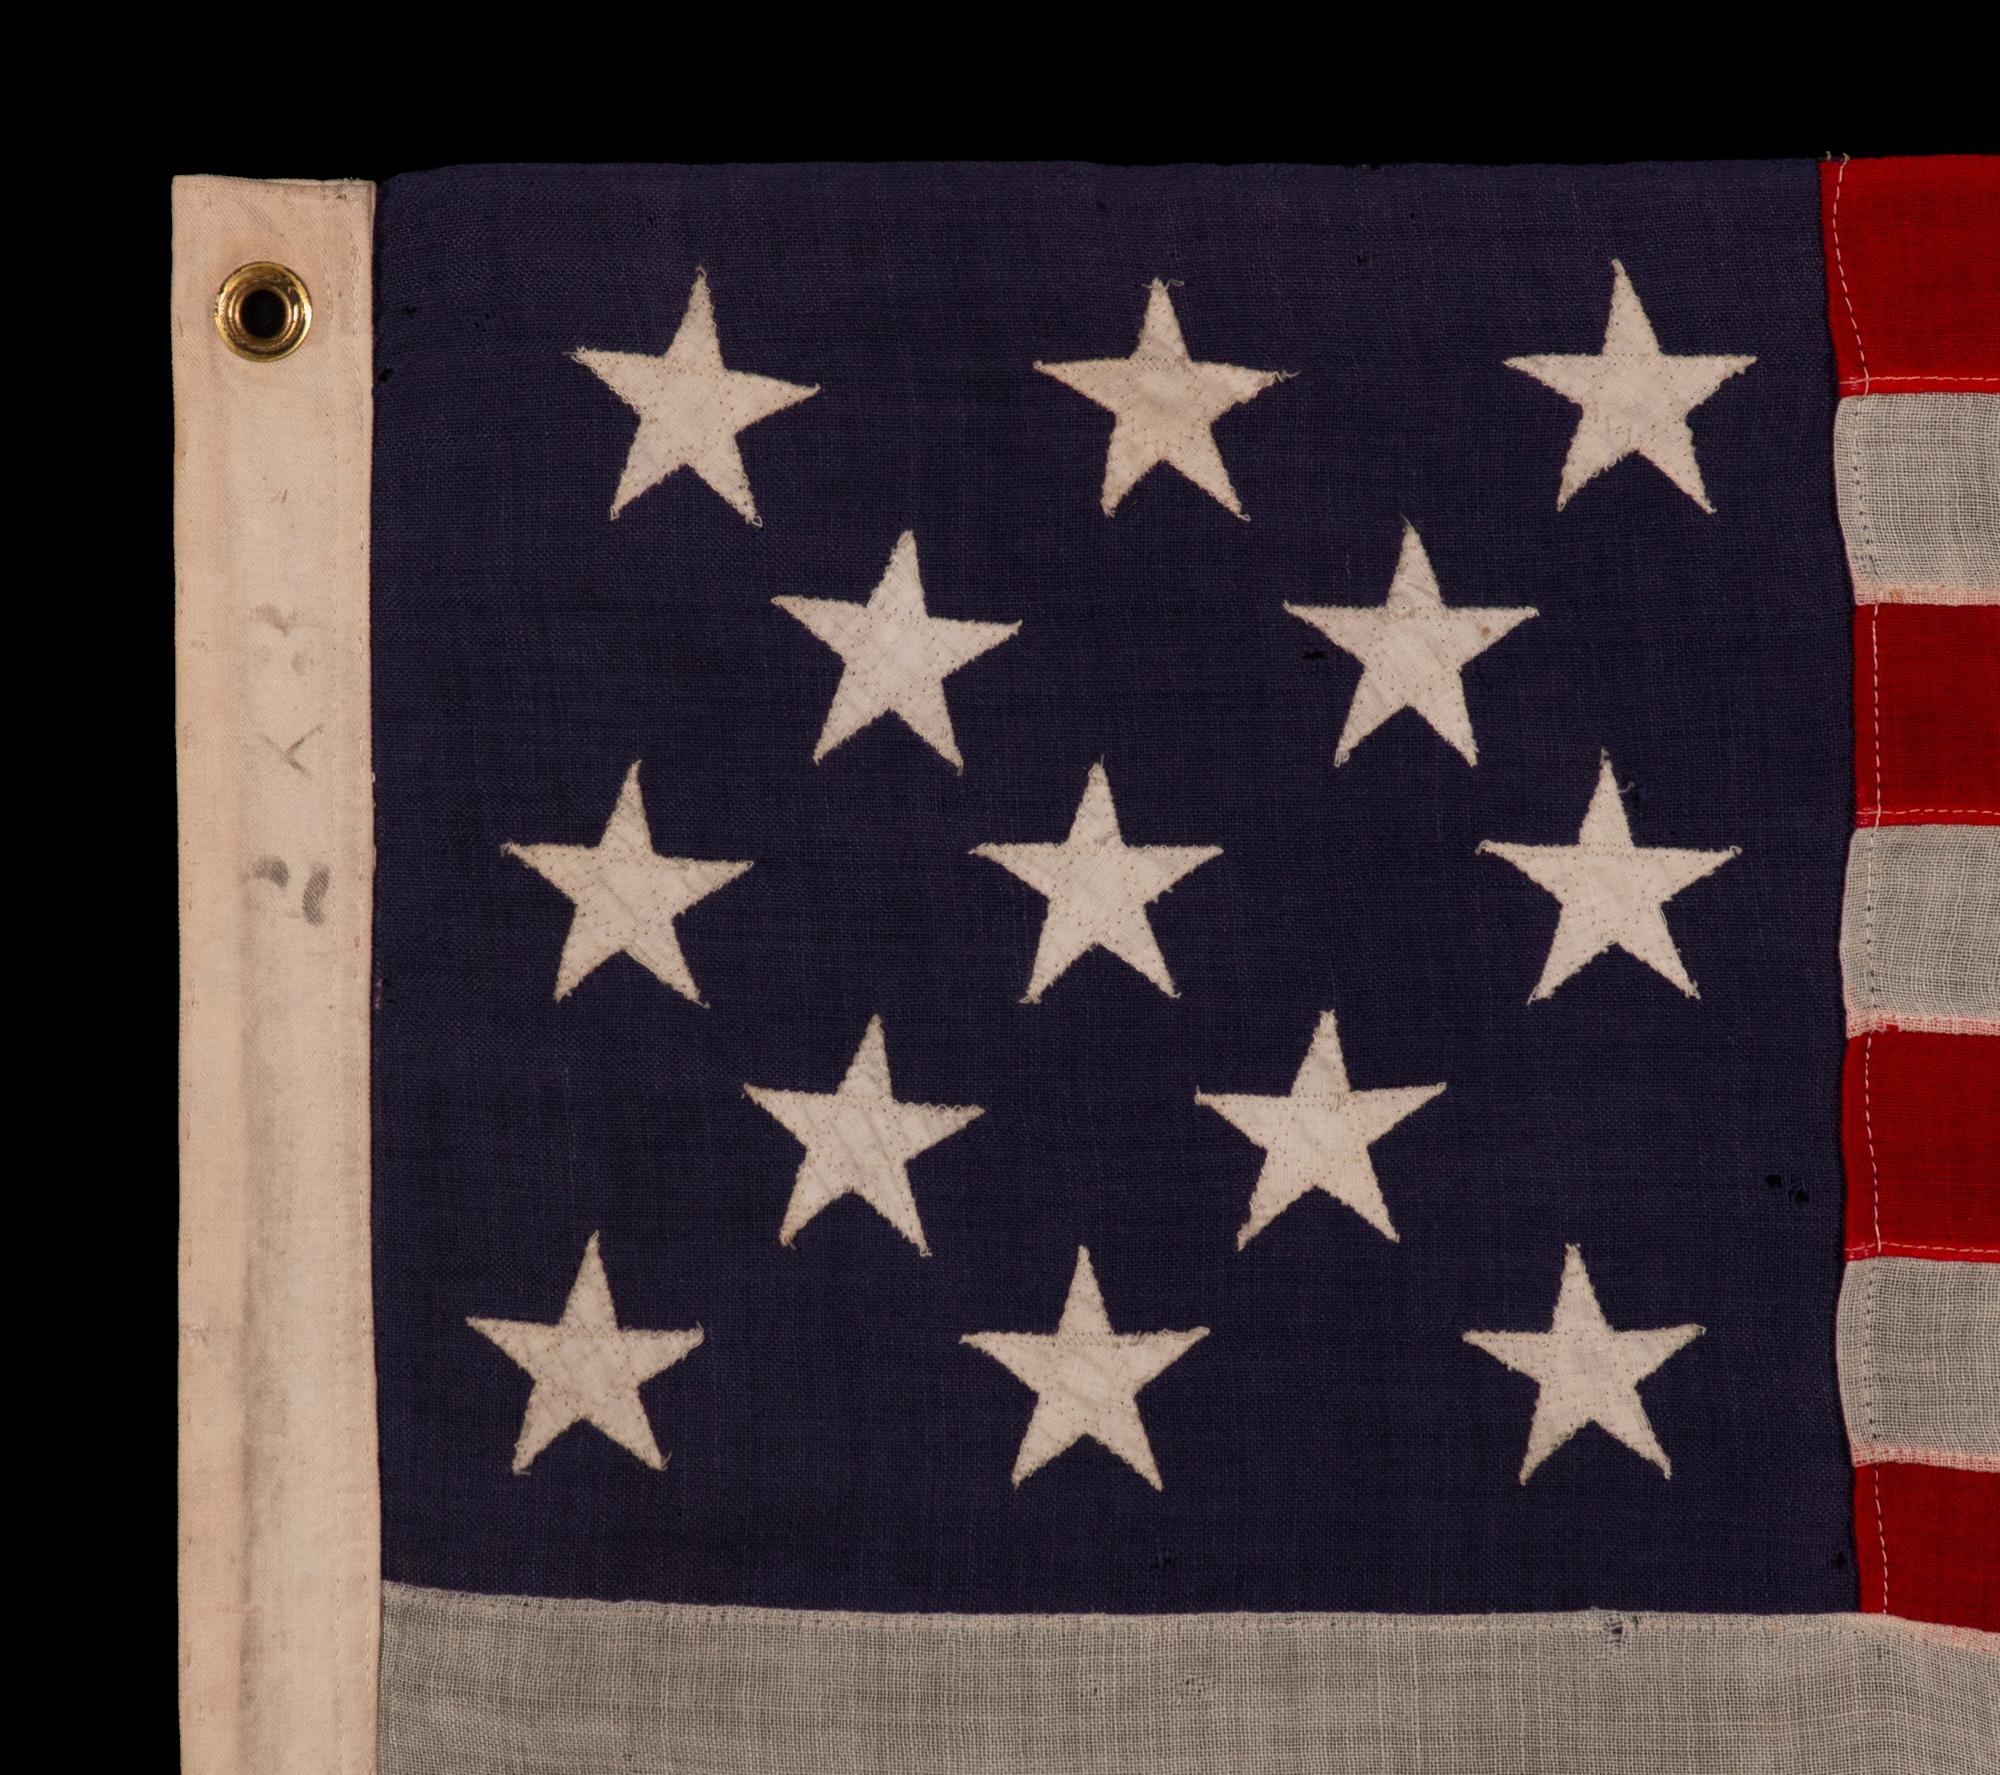 13 STAR ANTIQUE AMERICAN FLAG WITH A 3-2-3-2-3 CONFIGURATION OF STARS ON AN INDIGO CANTON, SQUARISH PROPORTIONS, AND A BEAUTIFUL OVERALL PRESENTATION, MADE circa 1895-1926

This 13 star antique American flag is of a type made during the last decade